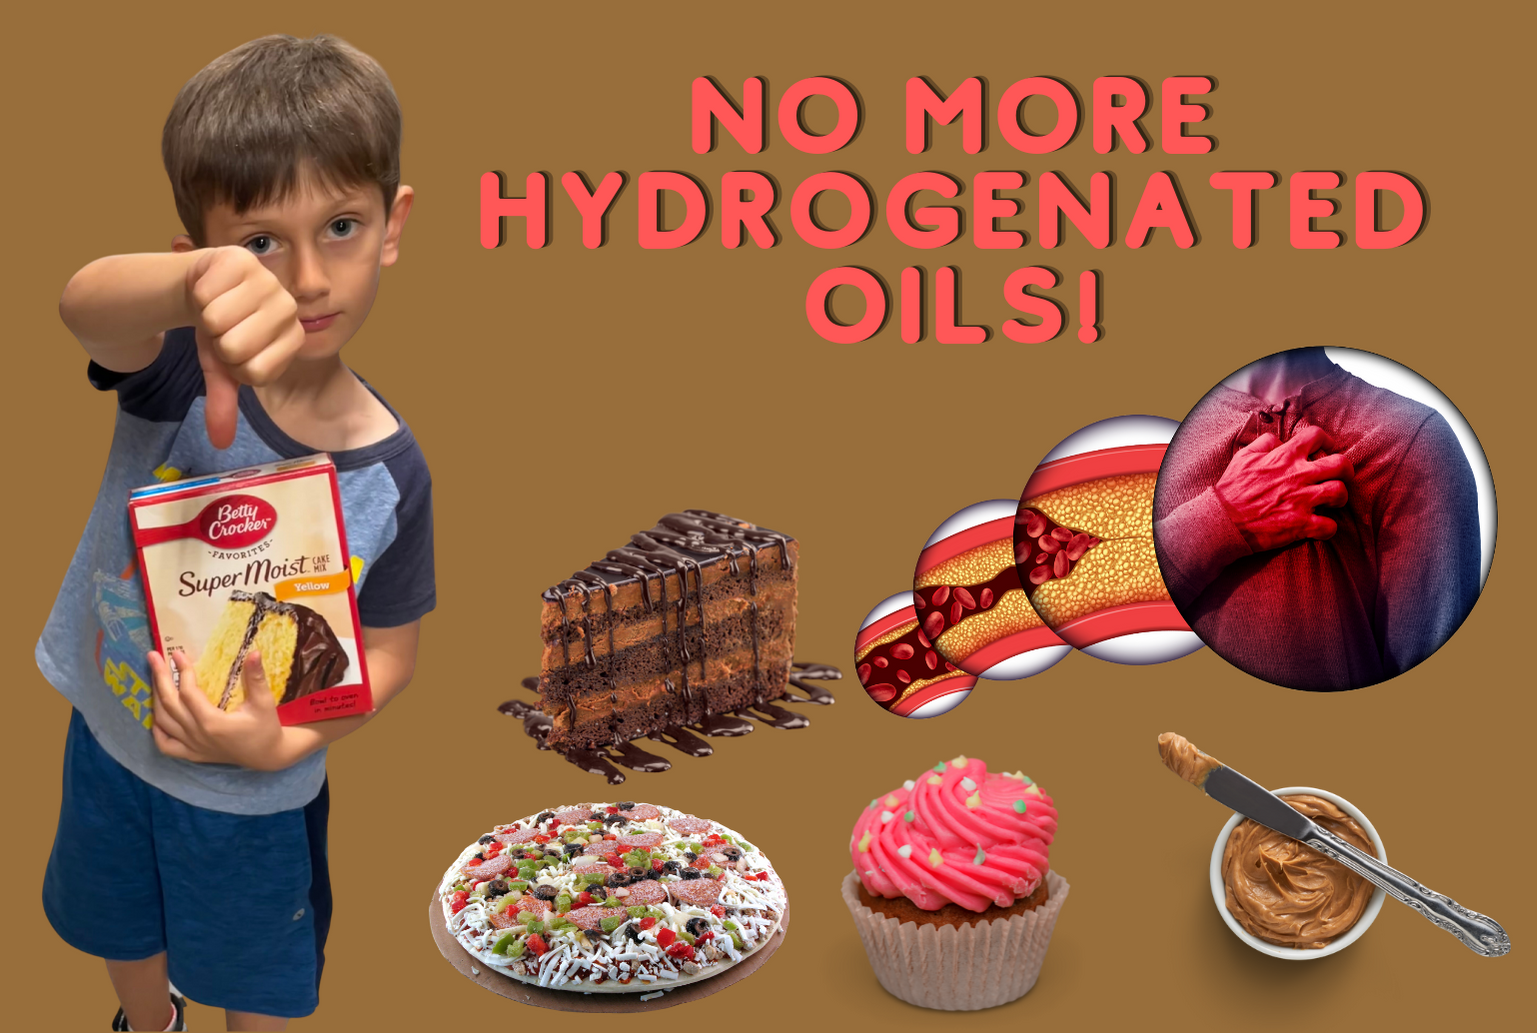 How and Why to Avoid Hydrogenated Oils